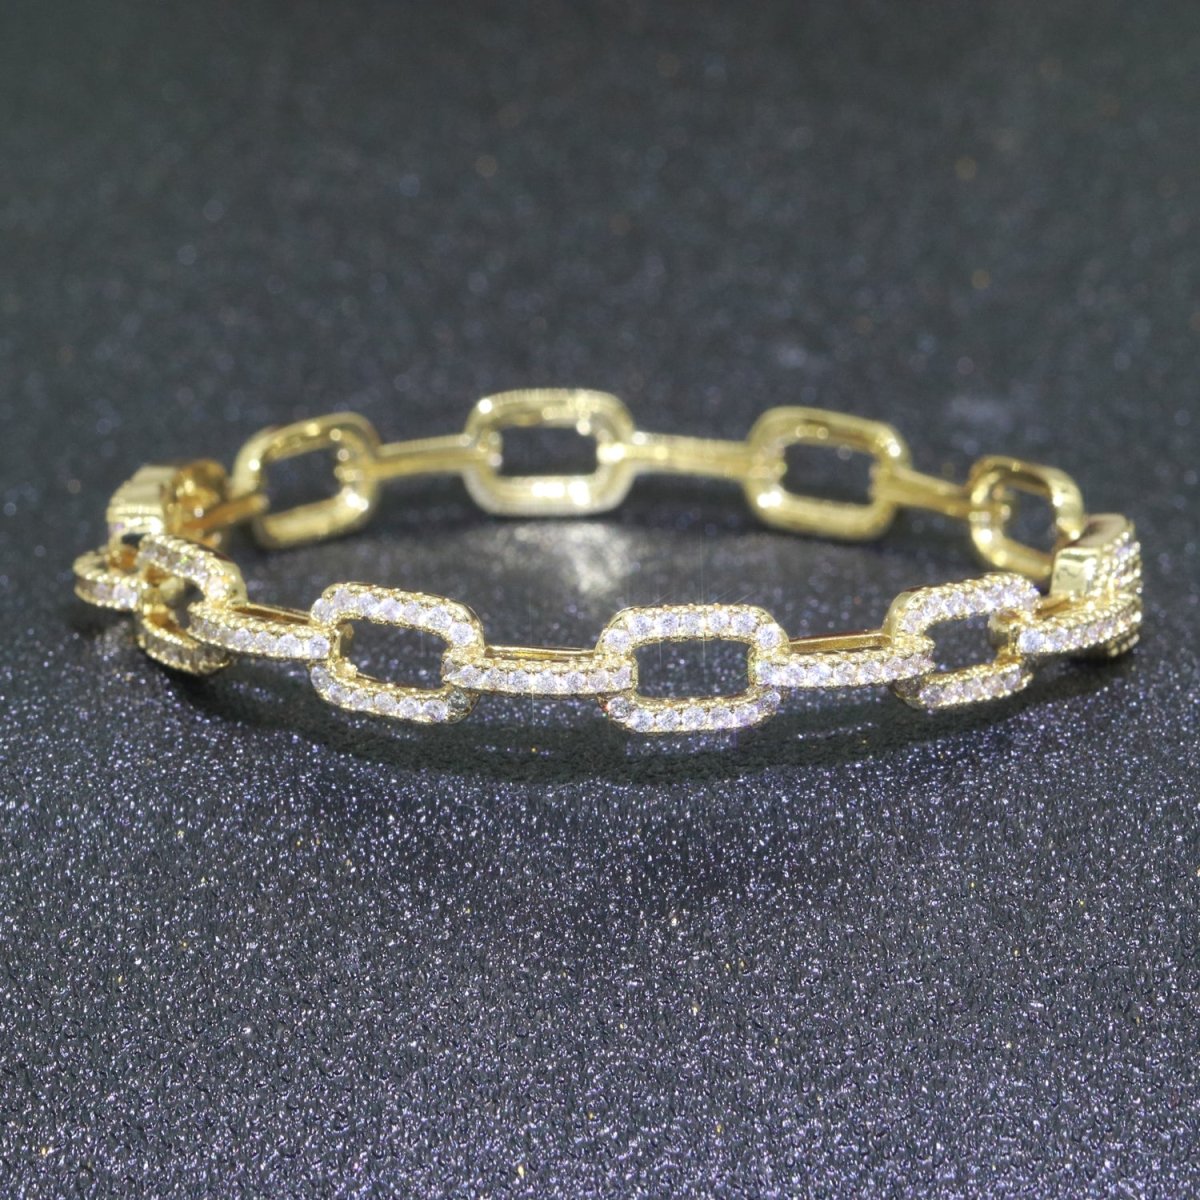 Micro Pave Gold Filled Link Chain Bangle Bracelet, Cubic Chunky Bracelet Designer Inspired Shiny Gold Cuff Bracelet | WA-062 Clearance Pricing - DLUXCA